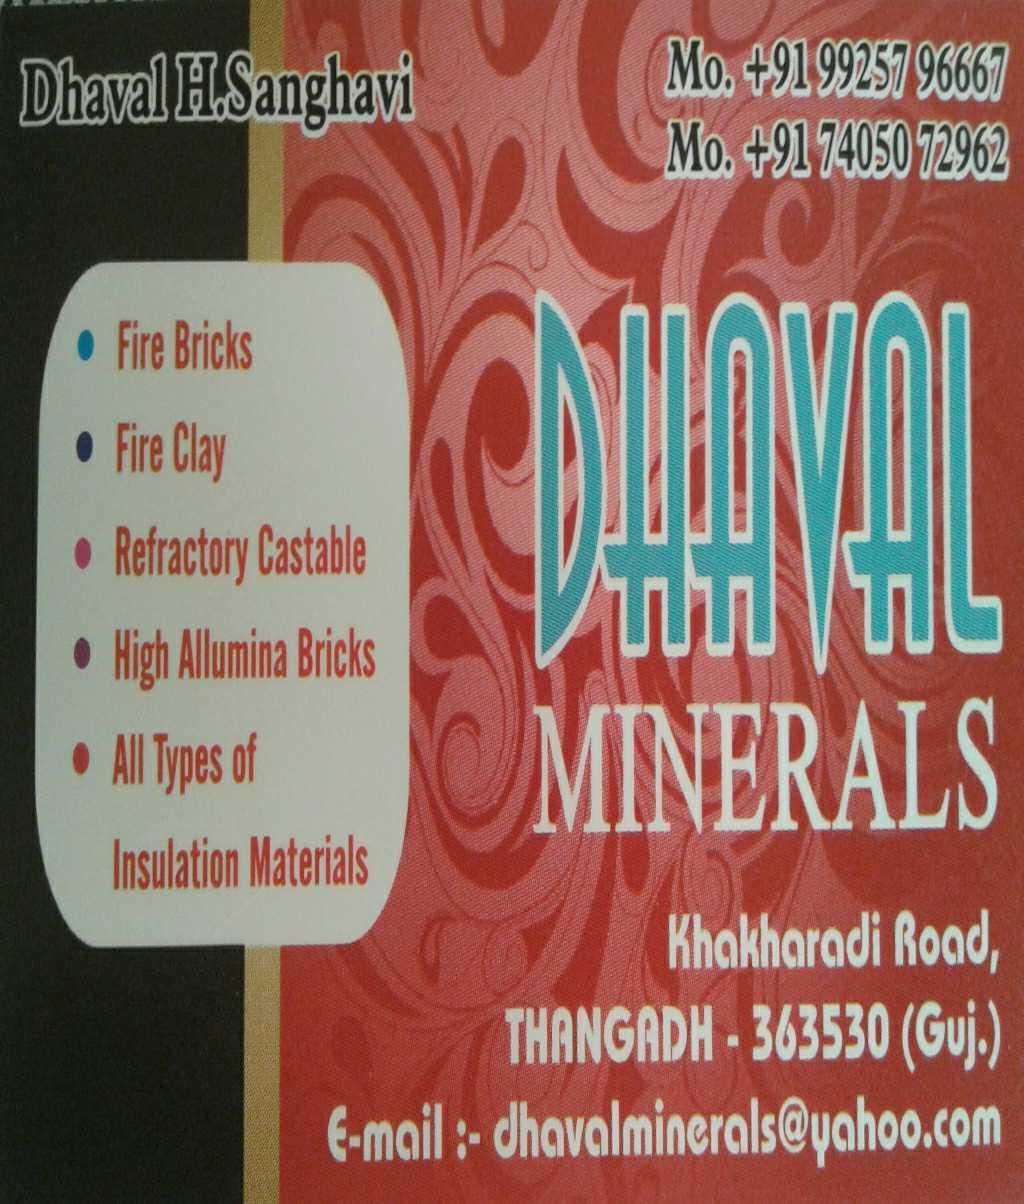 Dhaval Minerals